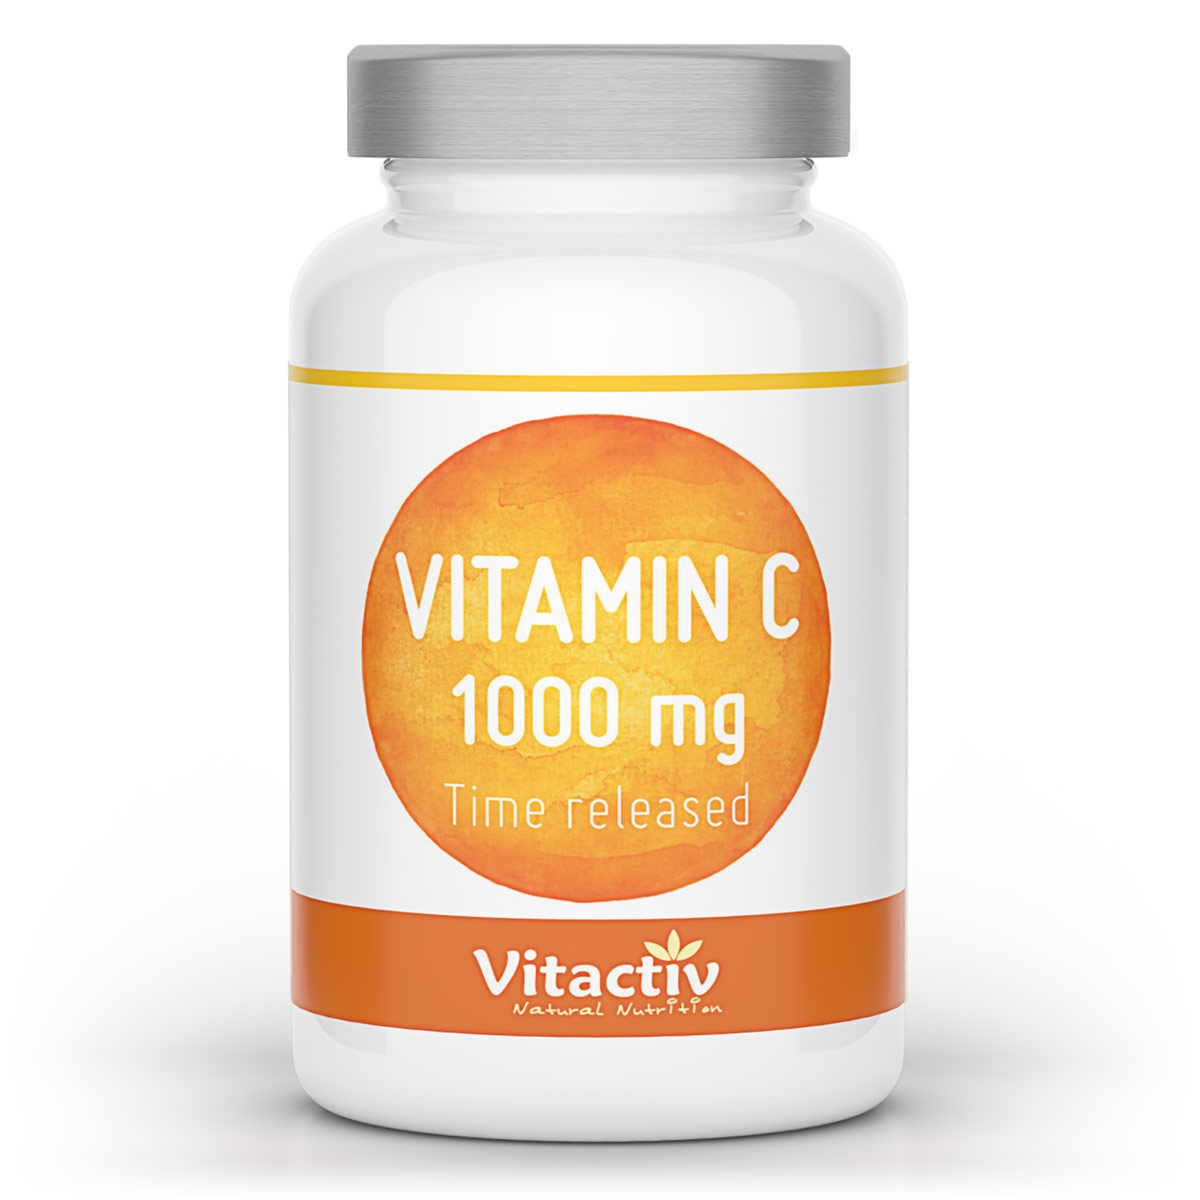 Produktverpackung VITAMIN C 1000 mg Time Released